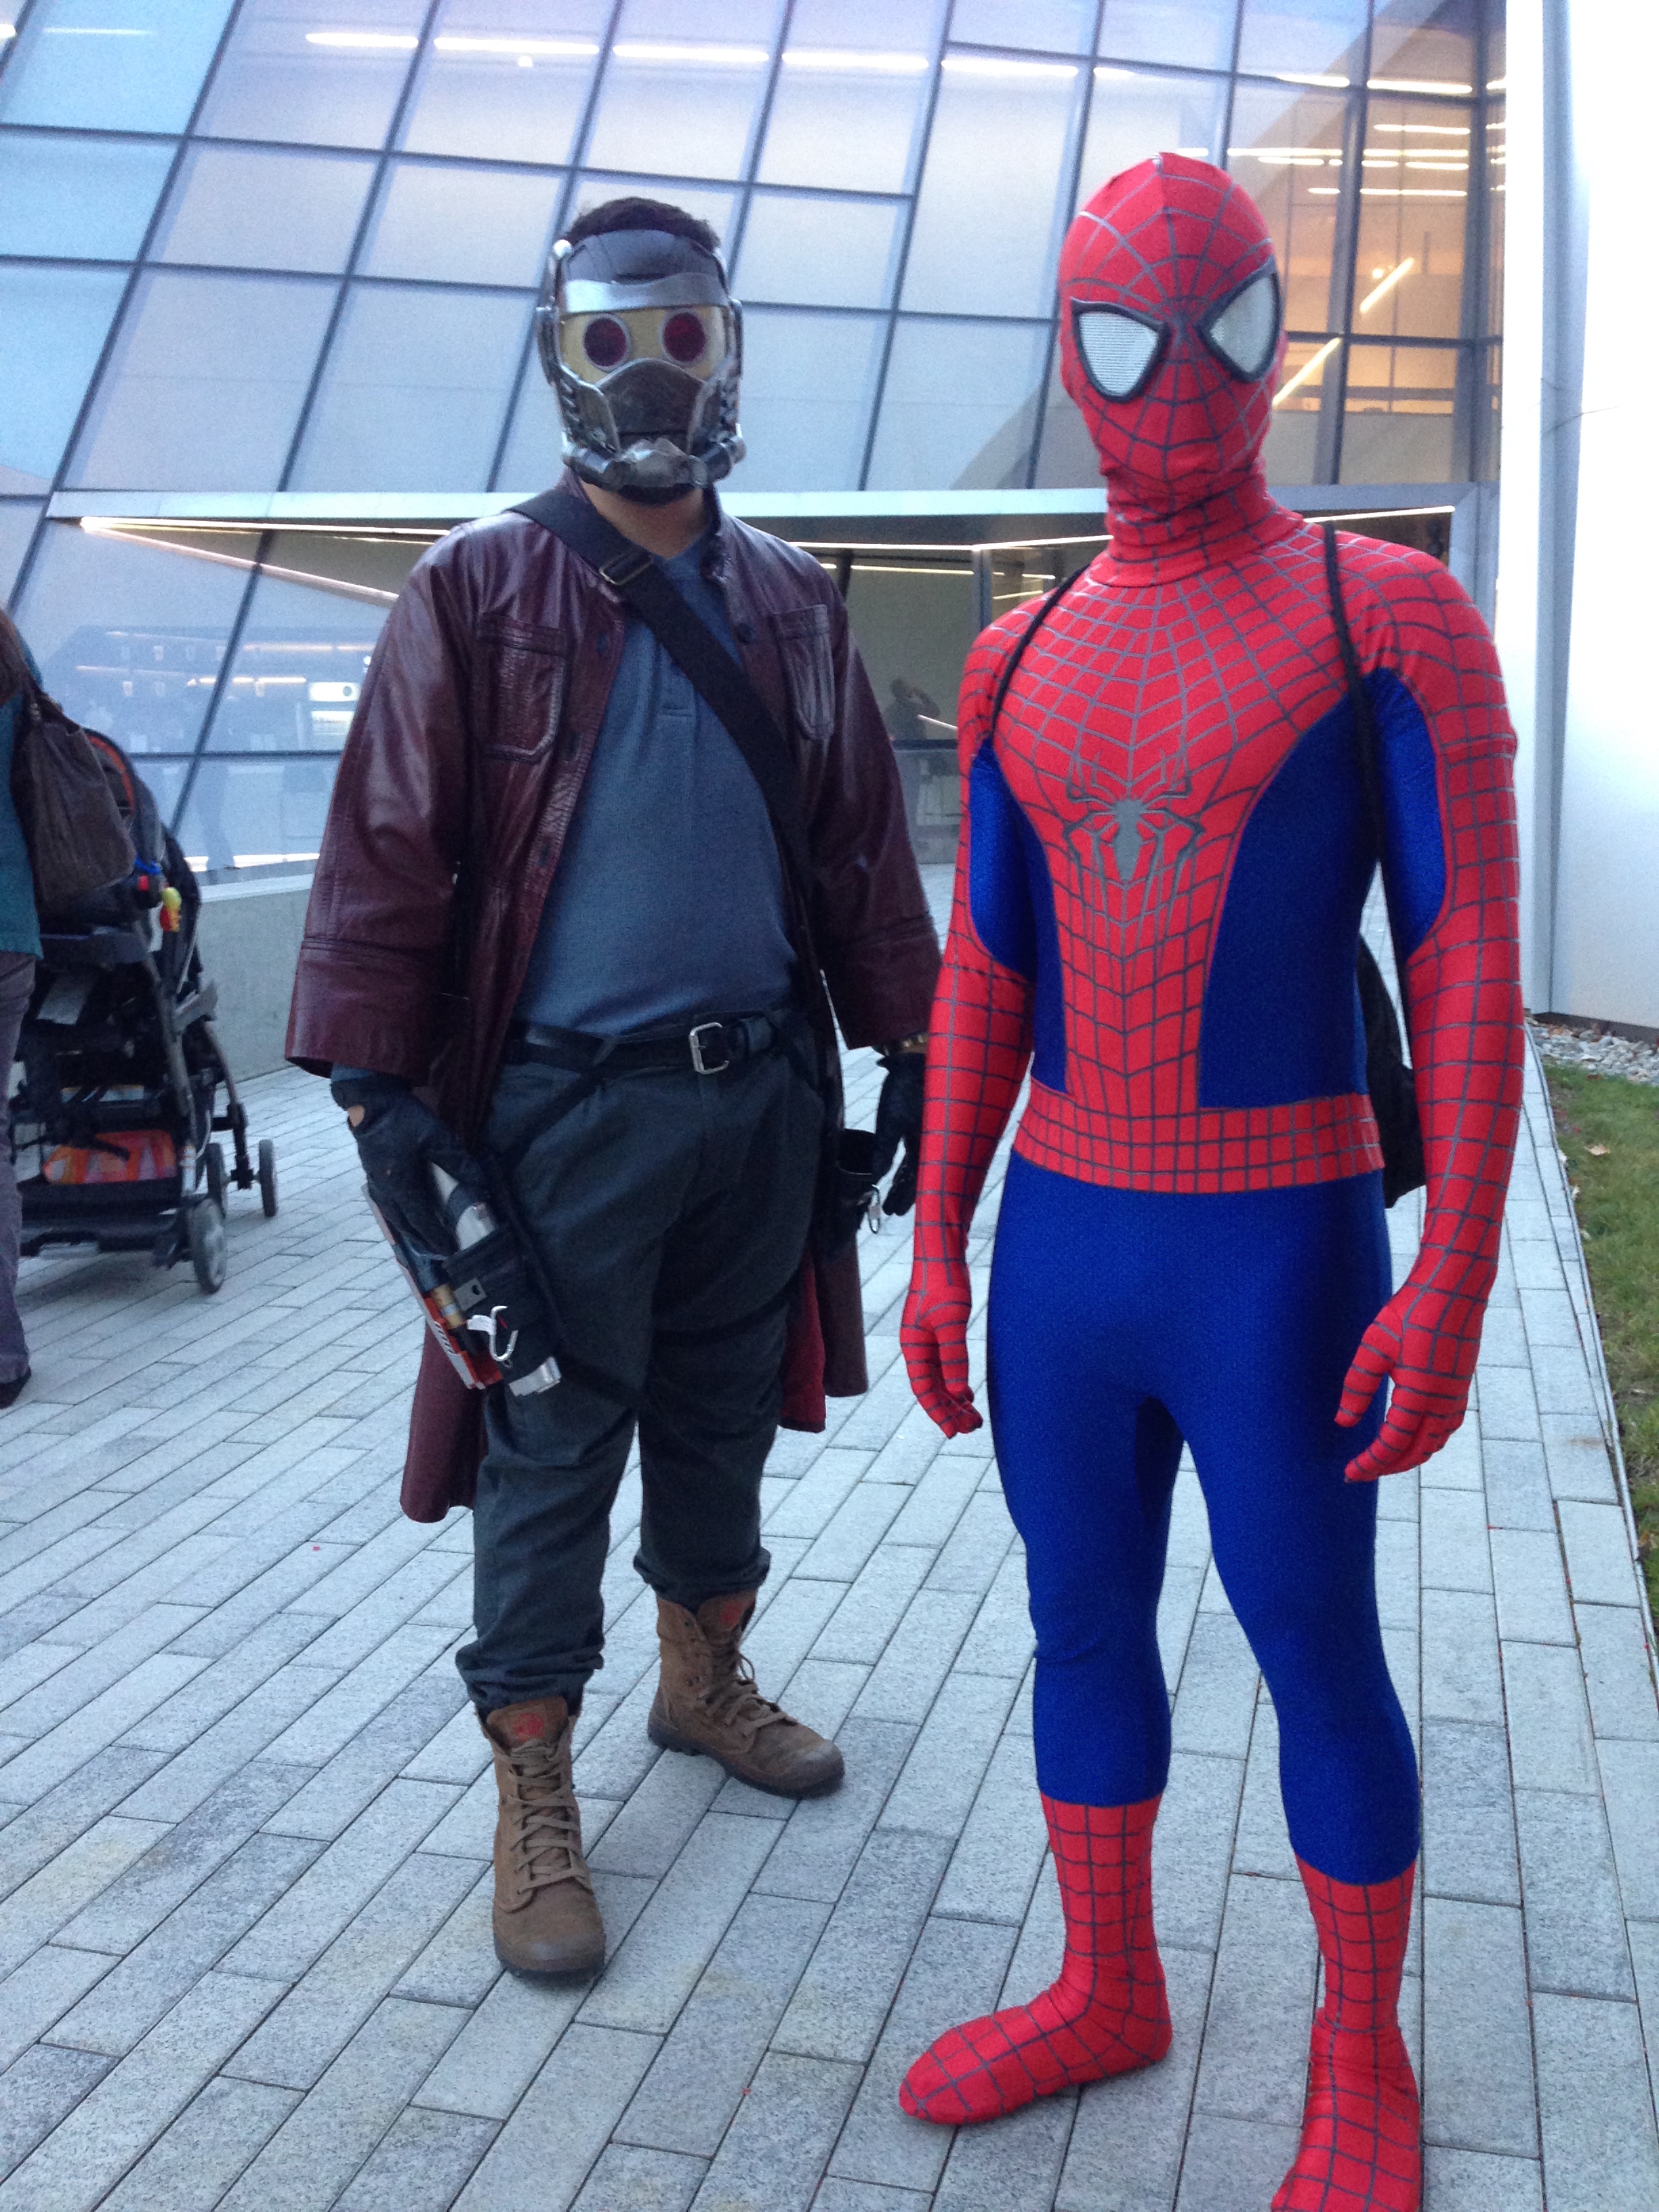 Star Lord and Spider-Man on trial run after making costumes.